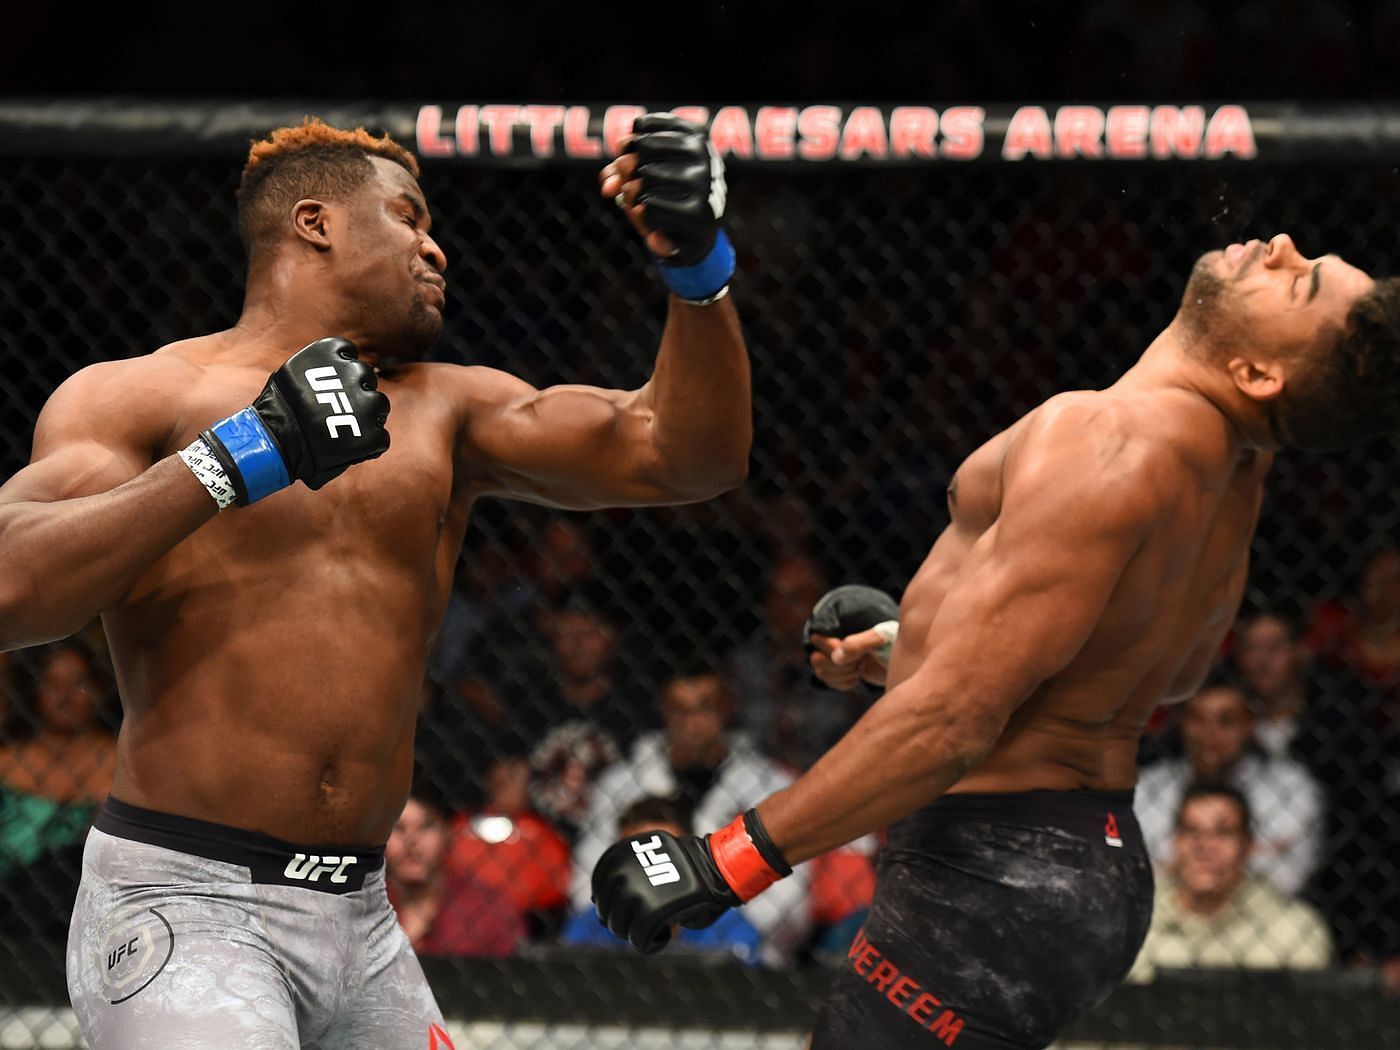 Alistair Overeem suffered a devastating knockout at the hands of Francis Ngannou in 2017